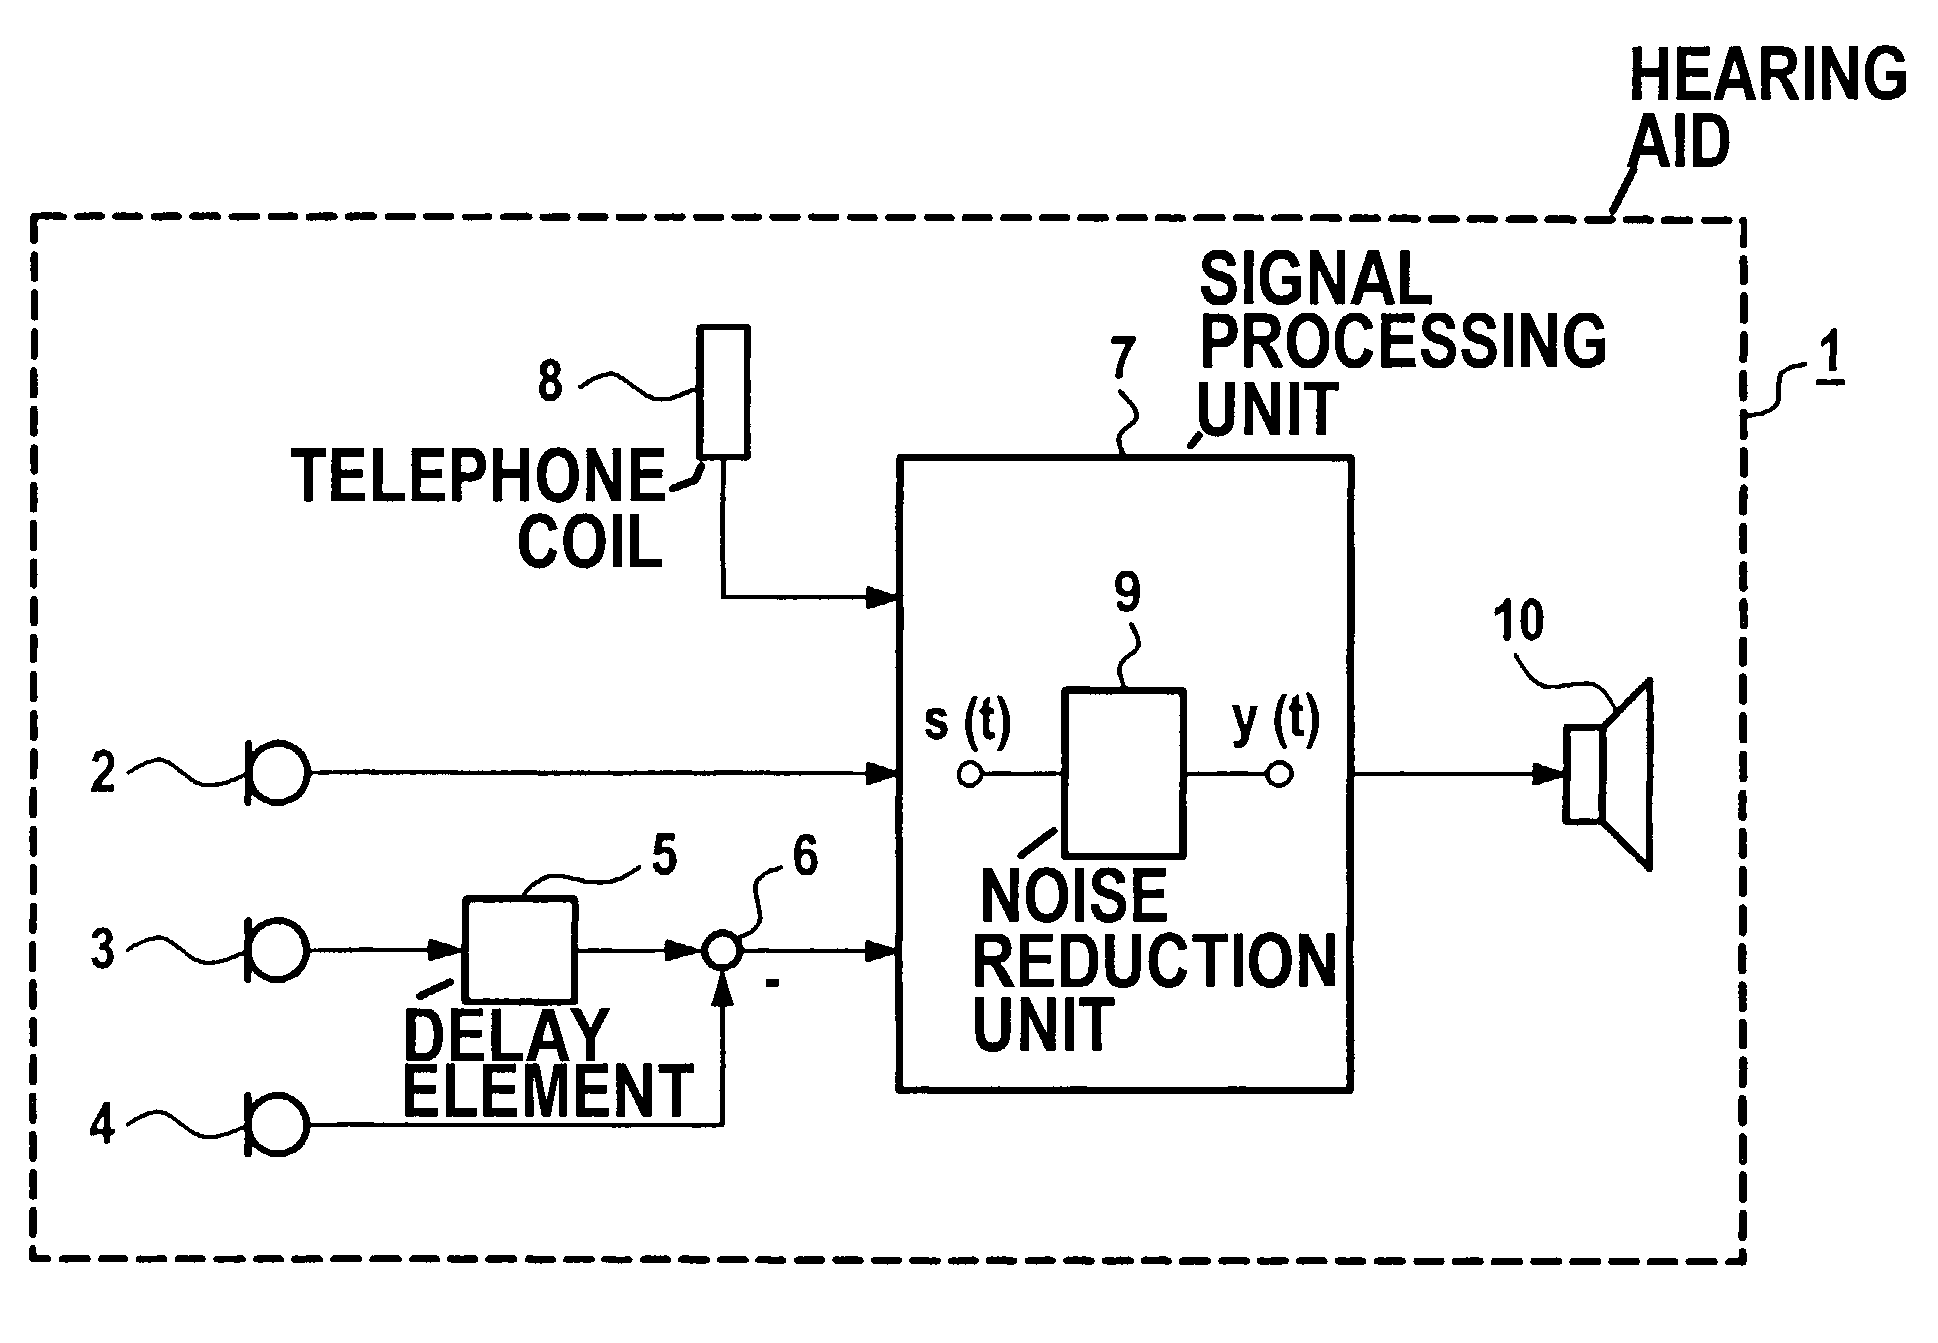 Method for the operation of a hearing aid as well as a hearing aid